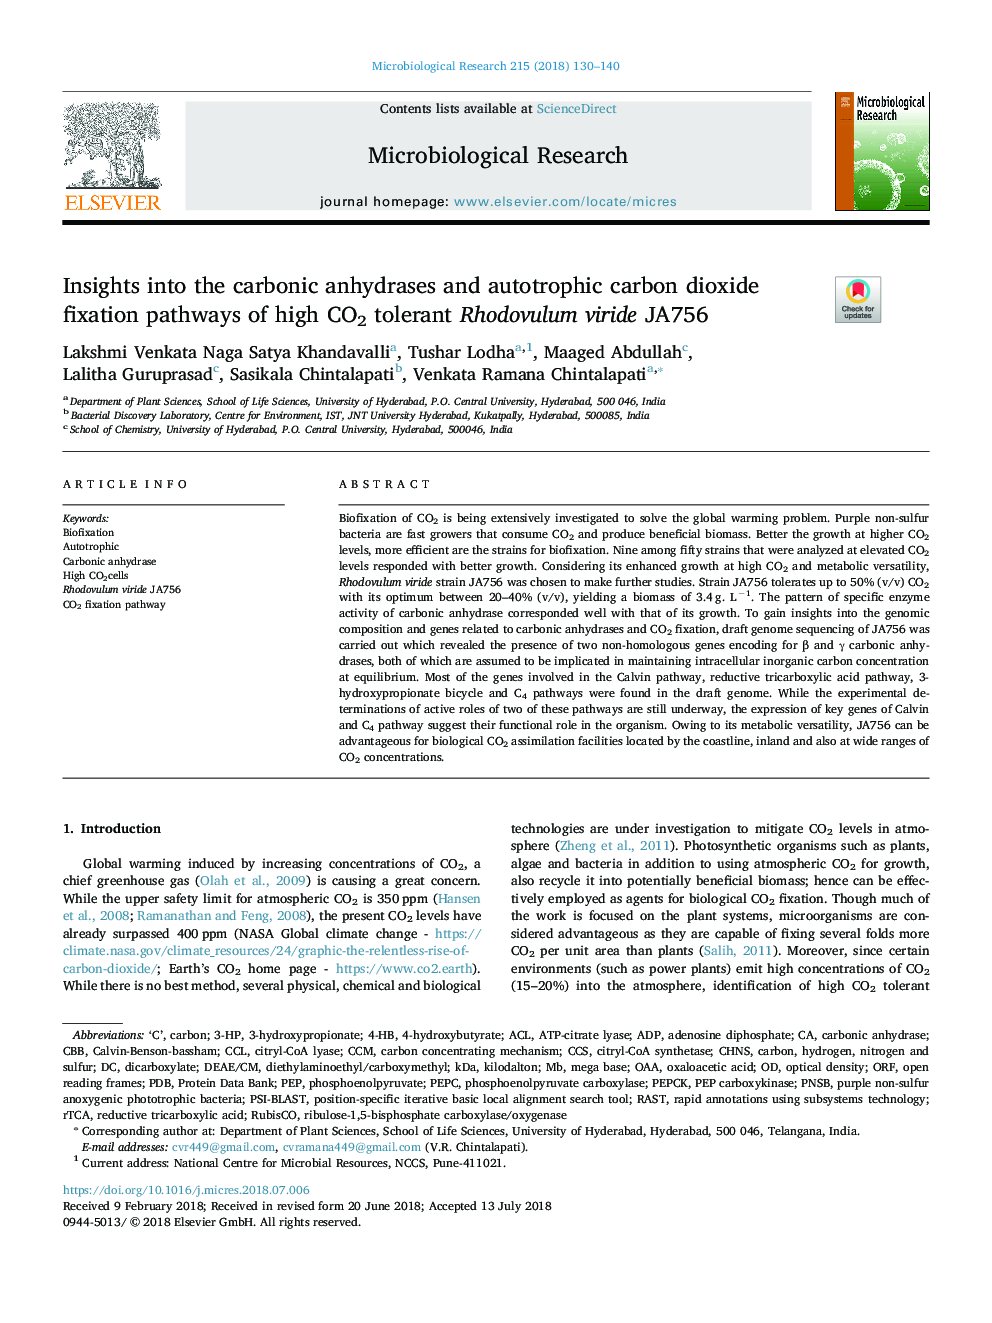 Insights into the carbonic anhydrases and autotrophic carbon dioxide fixation pathways of high CO2 tolerant Rhodovulum viride JA756